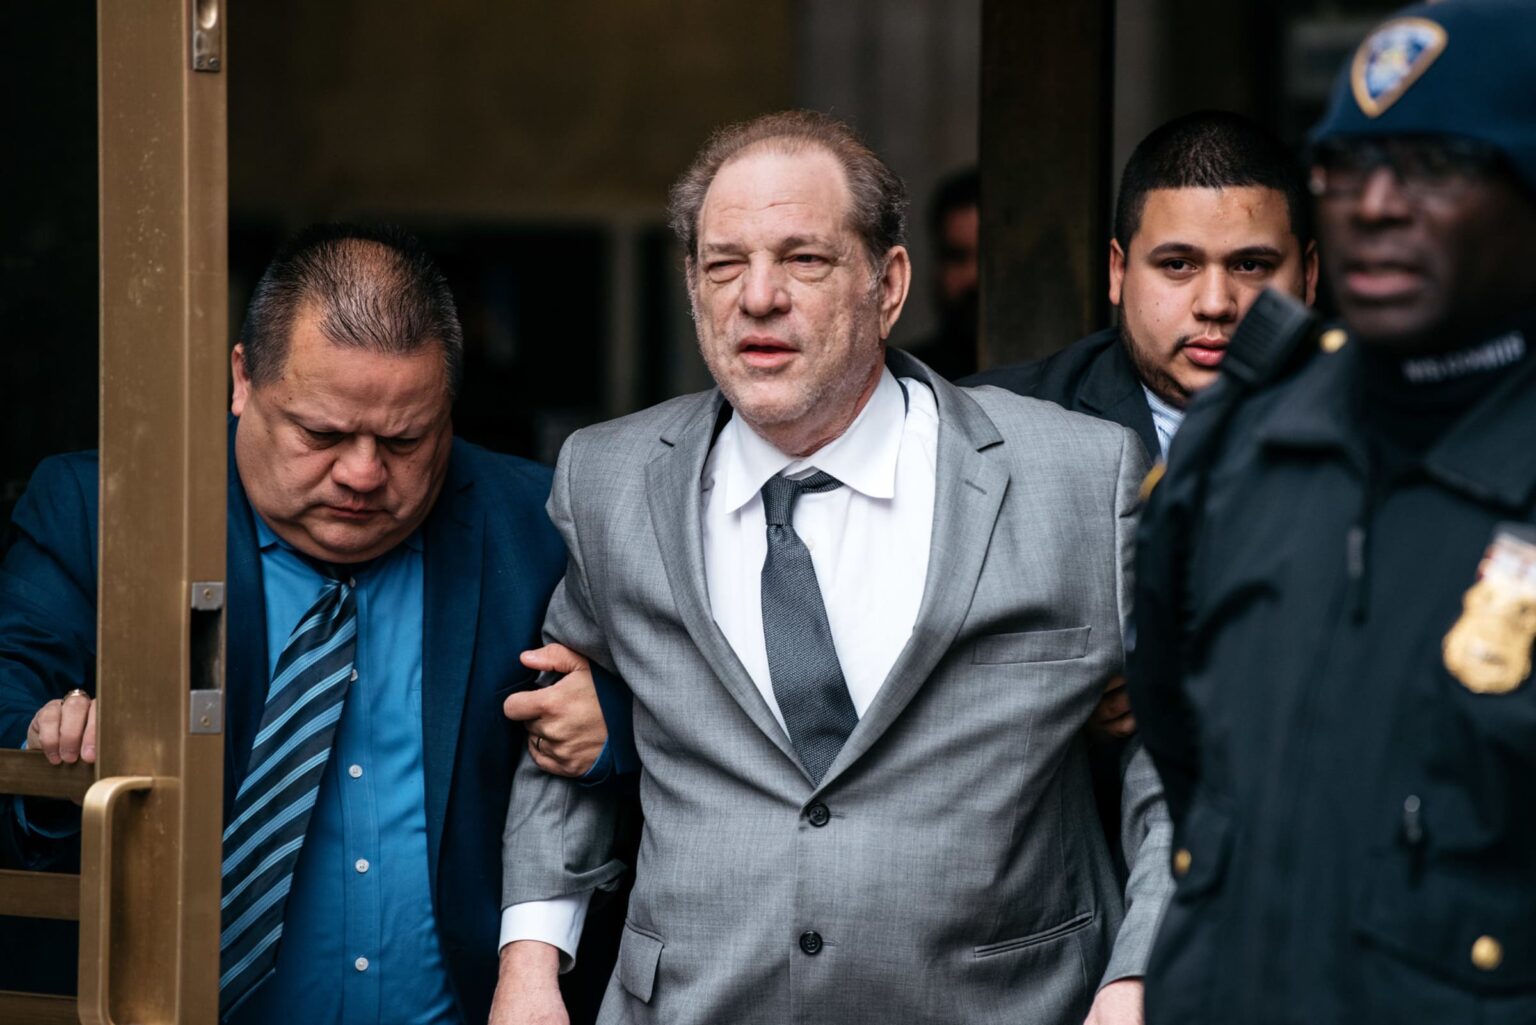 HBO Max's docuseries on Harvey Weinstein 'Catch and Kill' puts the focus on the young victims of the predator. Prepare yourself to be horrified.